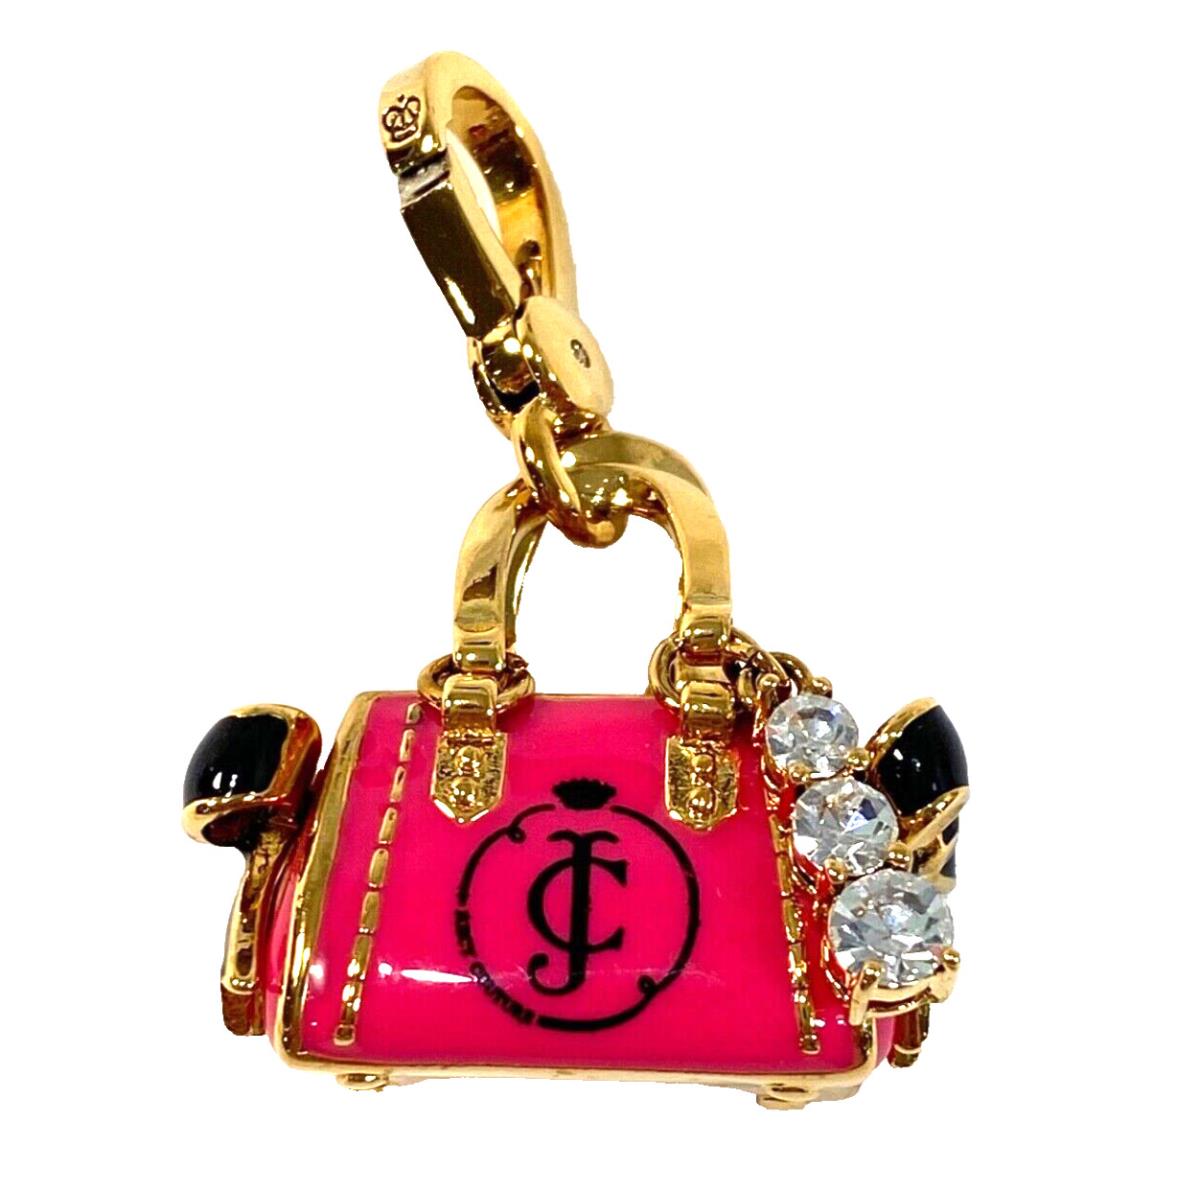 Juicy Couture Charm Pink Daydreamer Bag Black Enamel Bows Crystals Barbie Core